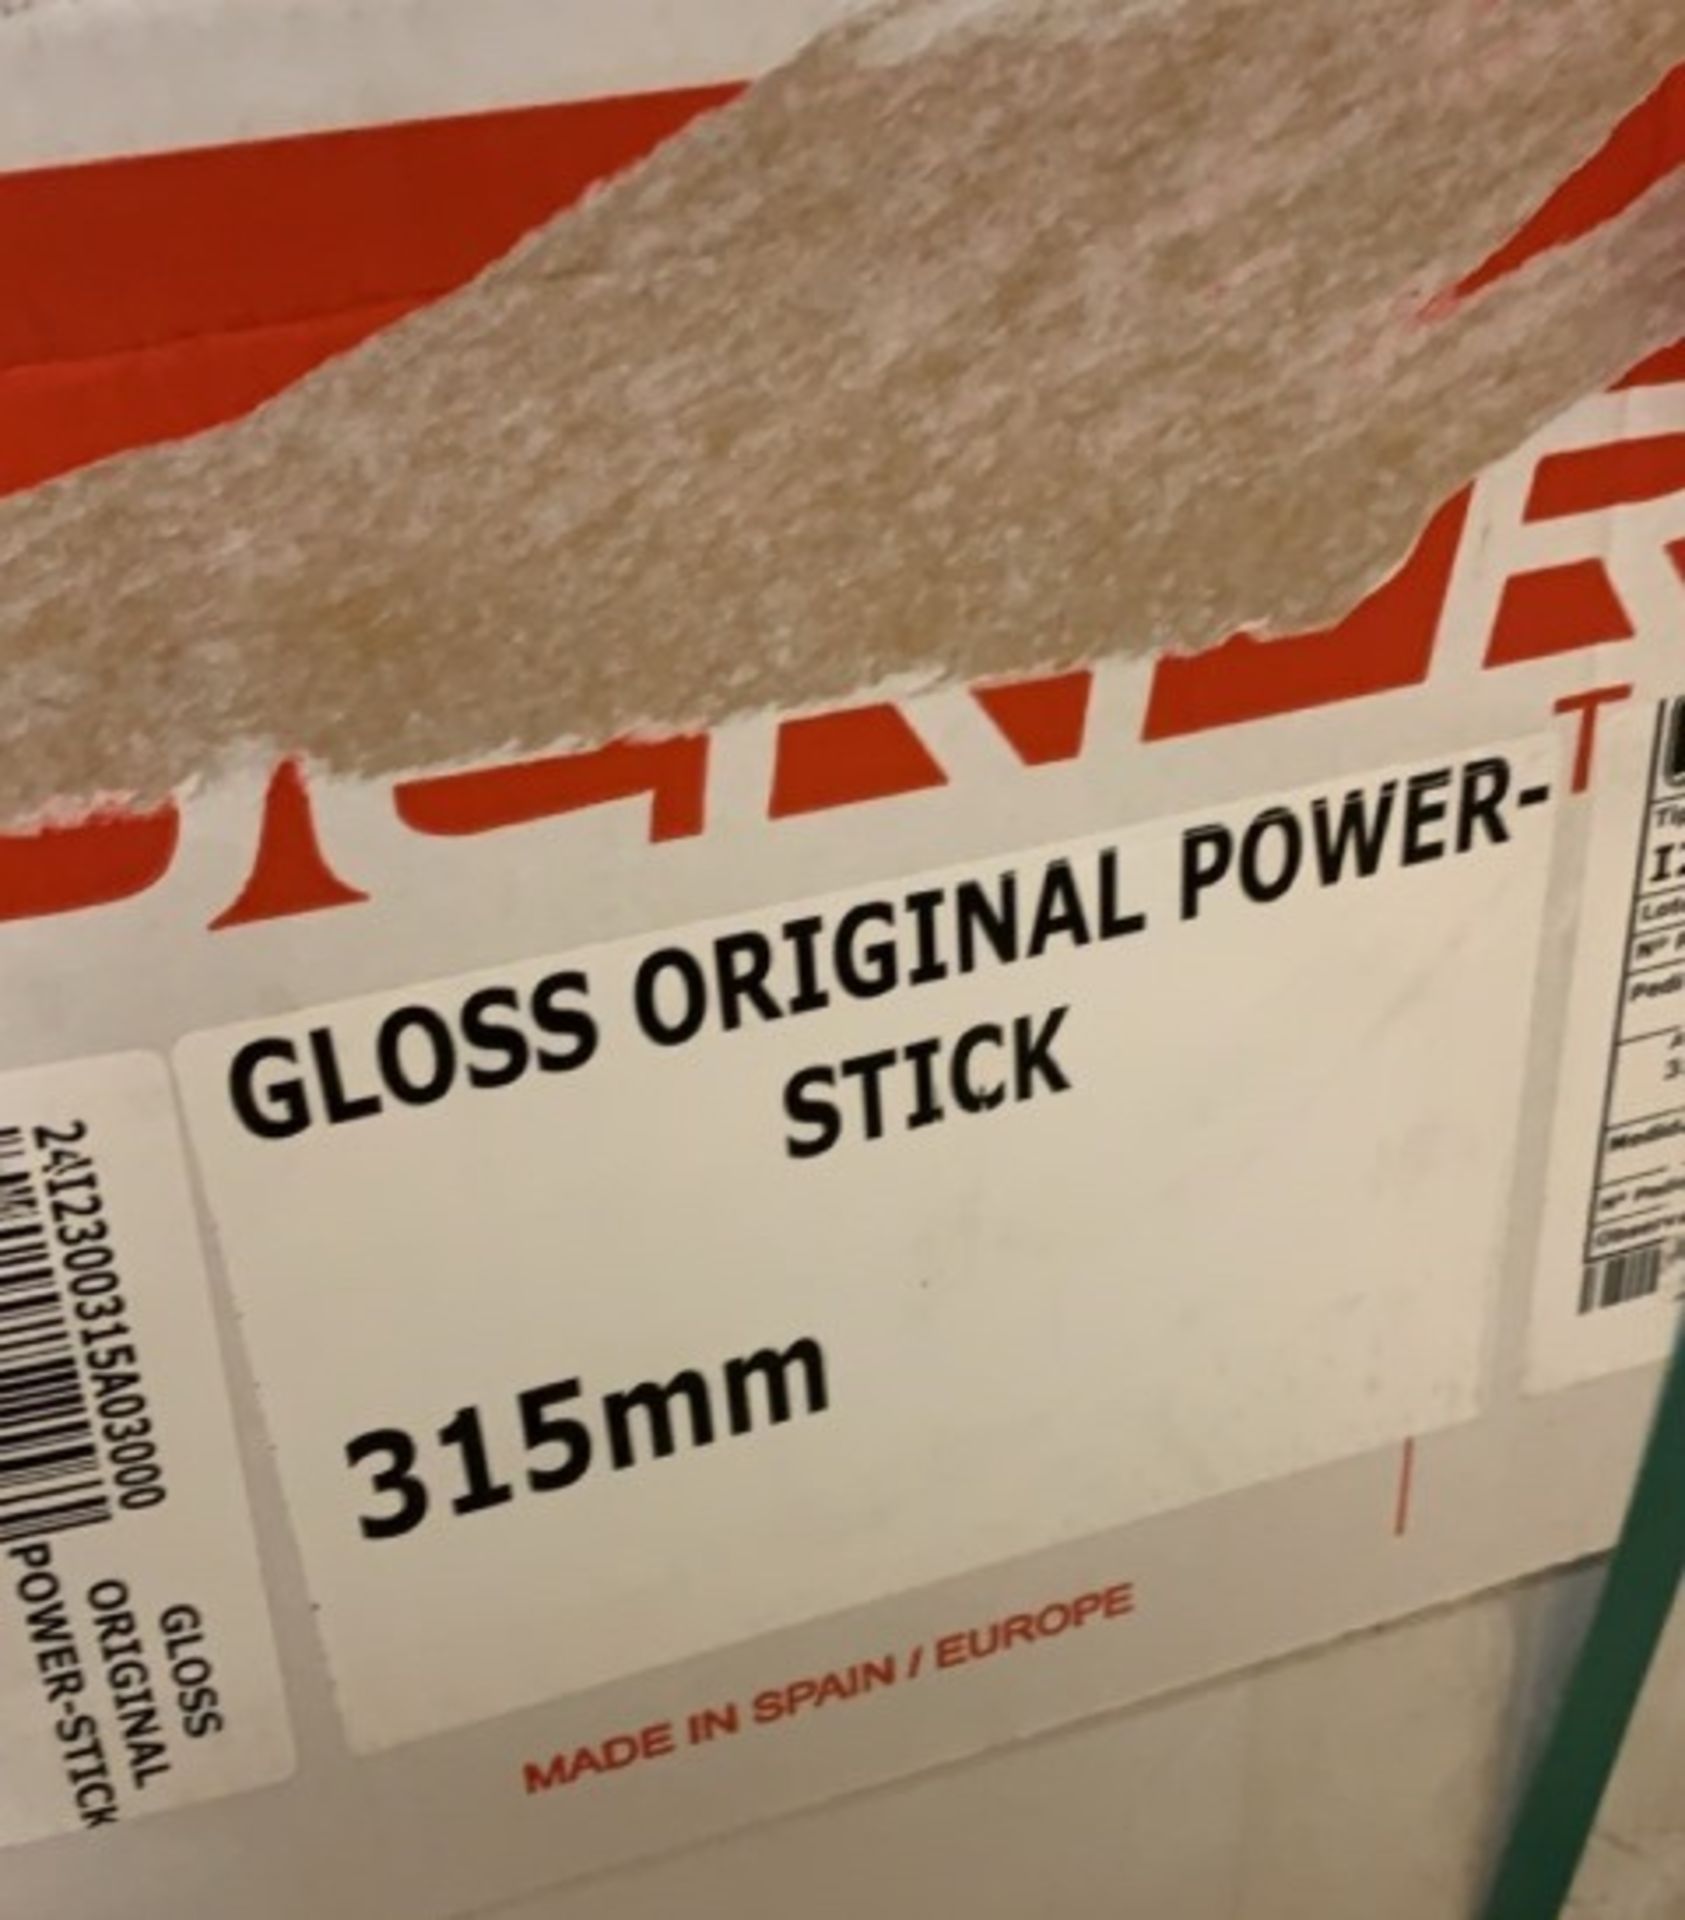 3 boxes of gloss original power stick and 1 box of digital thermal matte - Image 5 of 5